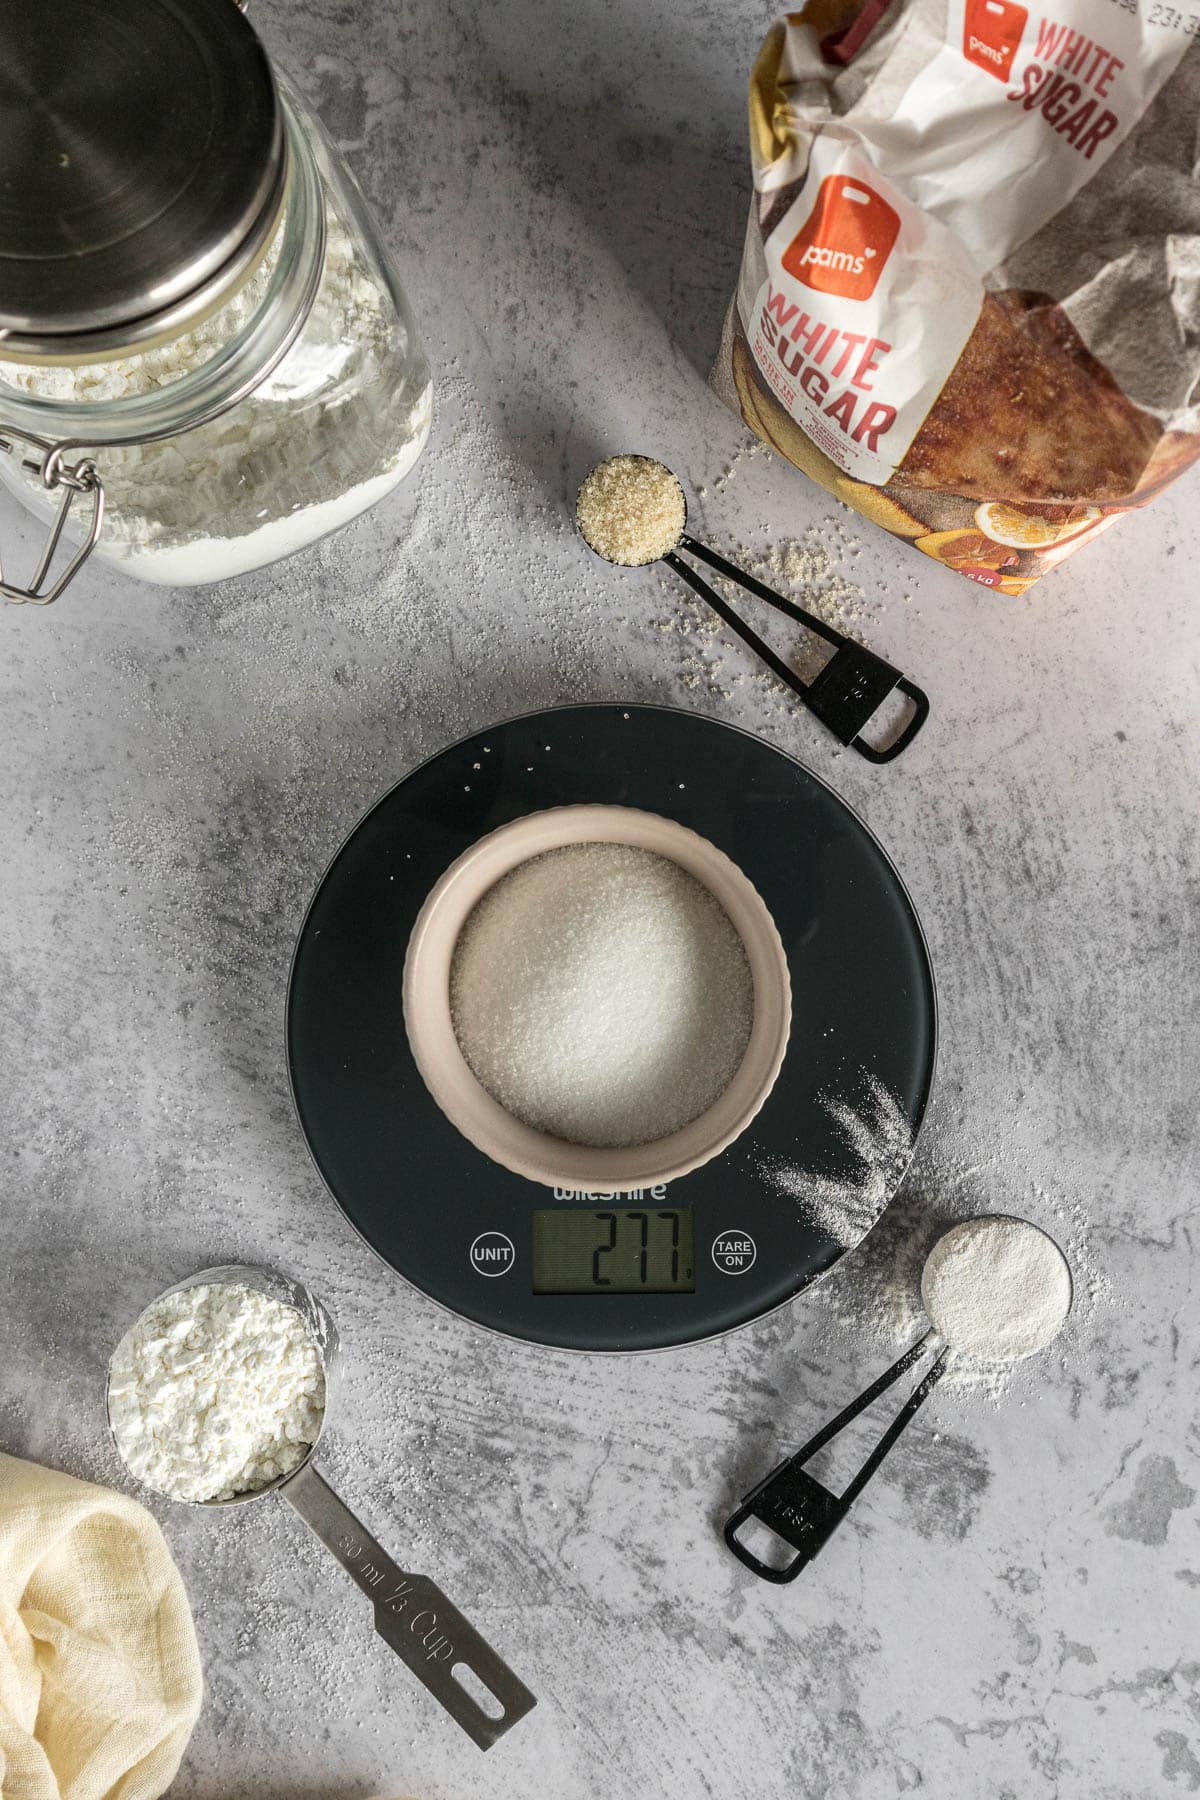 Sugar being weighed out on a kitchen scale.